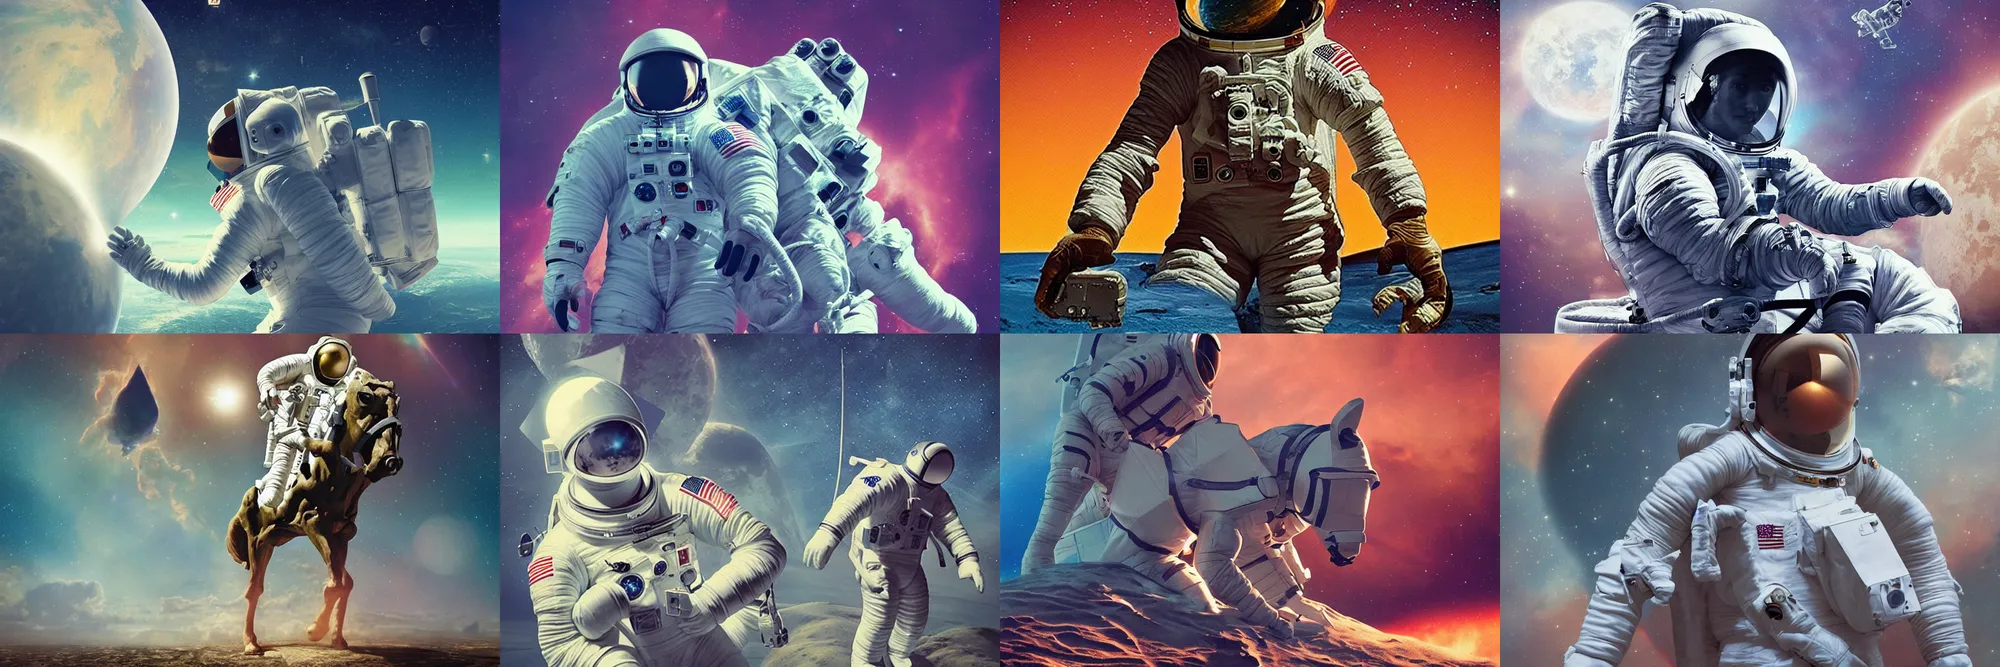 Prompt: astronaut centaur in heroic pose, beeple, ultra detalied, iconic, epic poster